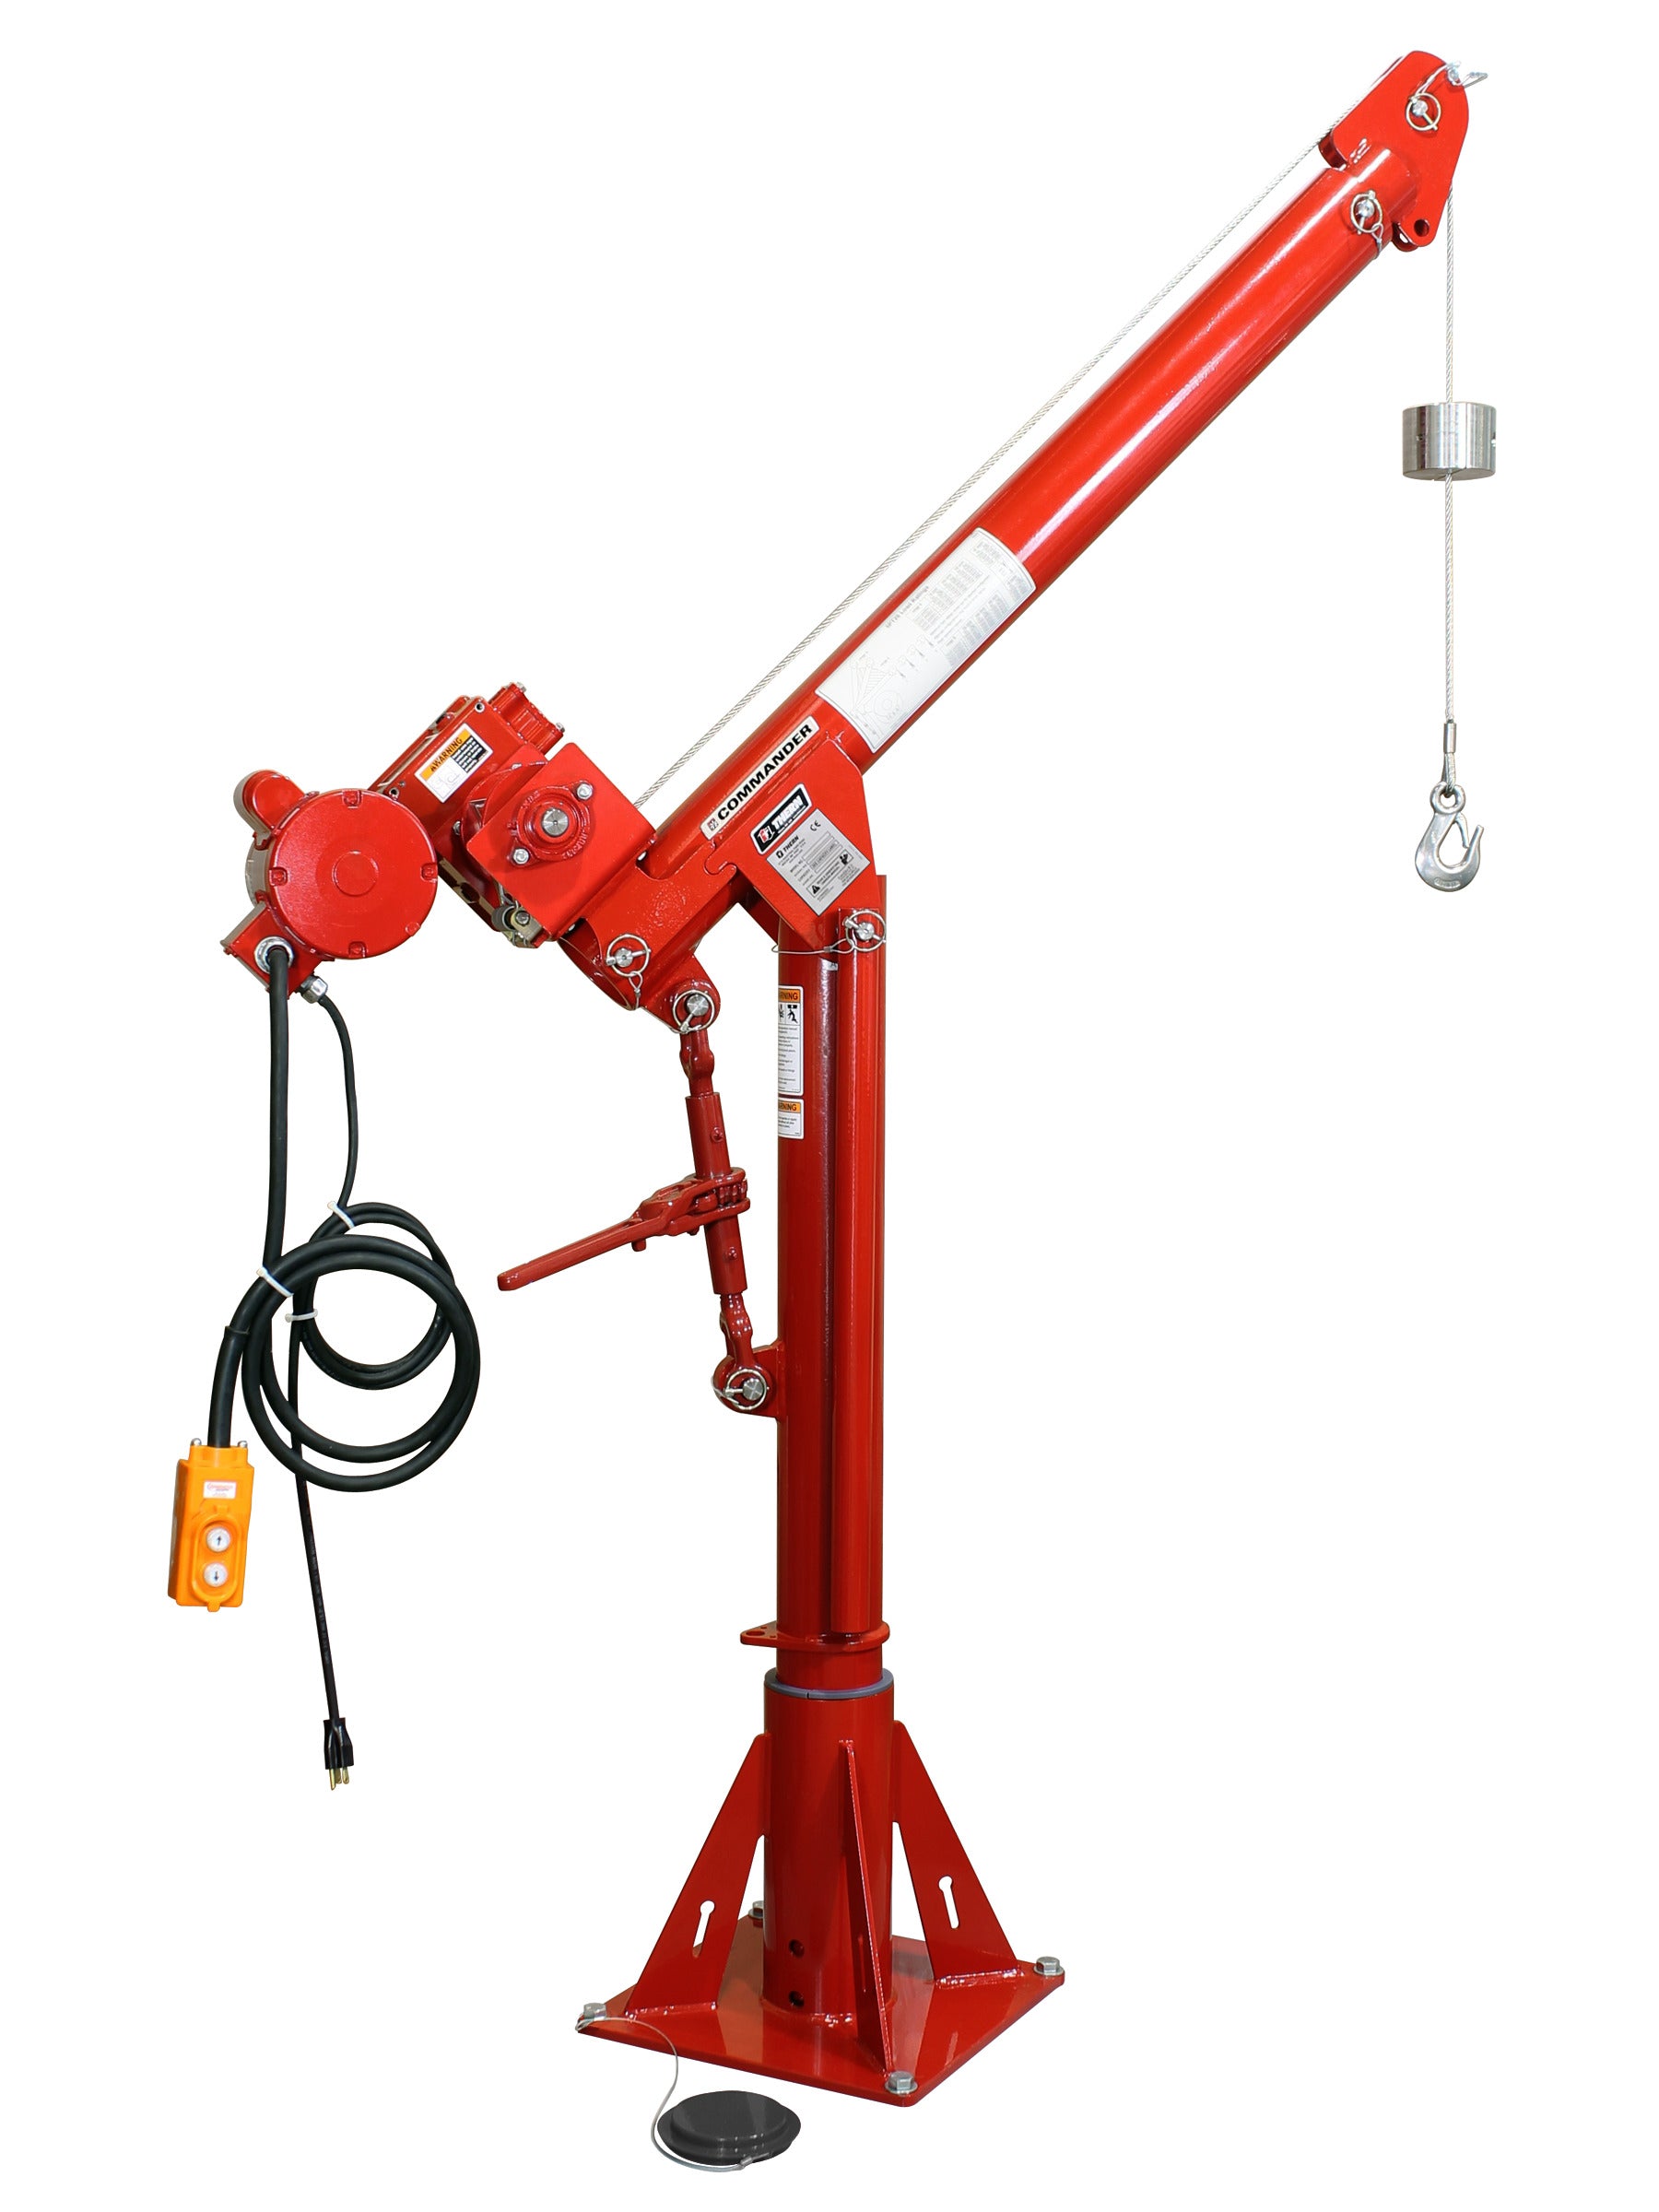 WHAT IS A THERN DAVIT CRANE AND WHY SHOULD I BUY ONE?